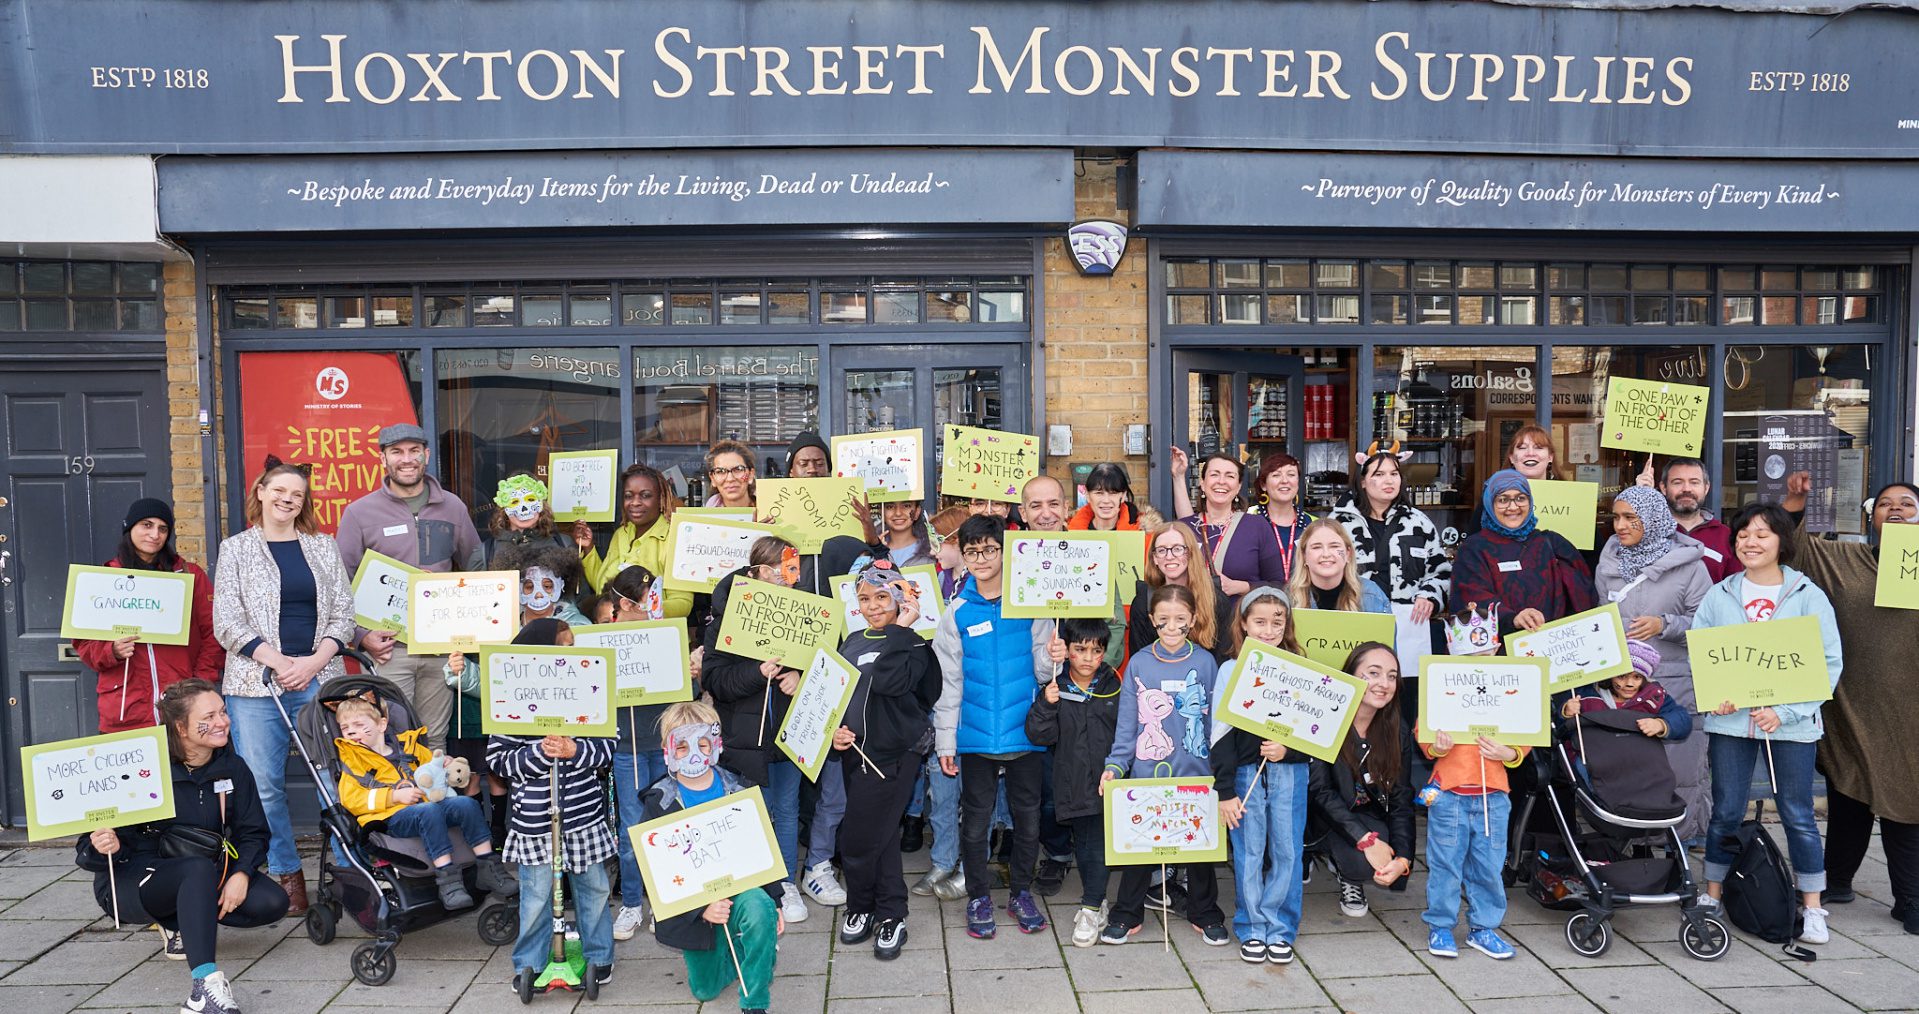 A large group of young people and adults stand in front of the grey Hoxton Street Monster Supplies shop waving lime green banners and placards with fun, monster puns written in black ink.